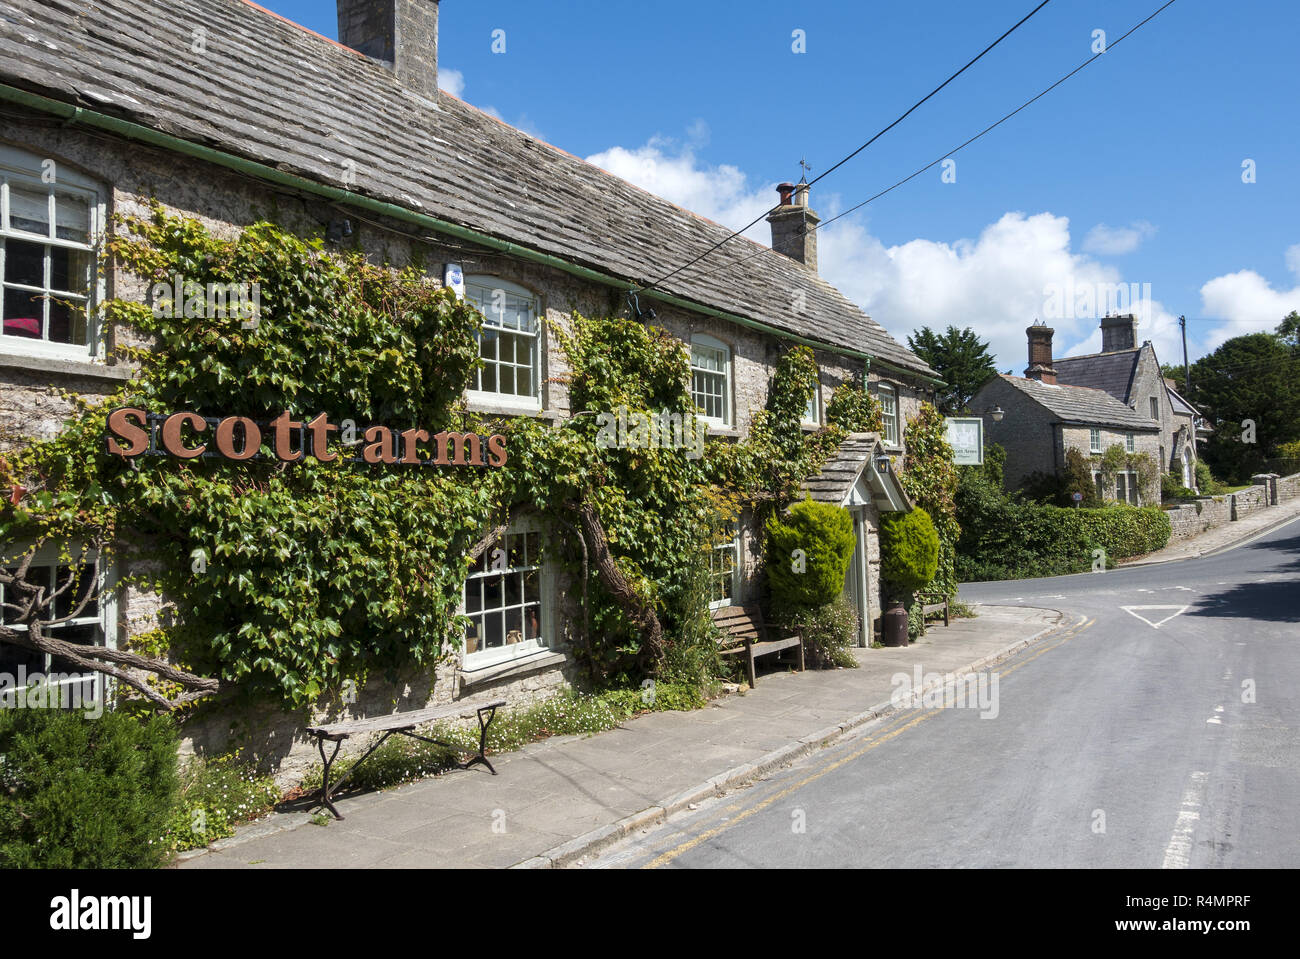 The Scott Arms pub in Kingston, Purbeck, Dorset, England, UK Stock Photo